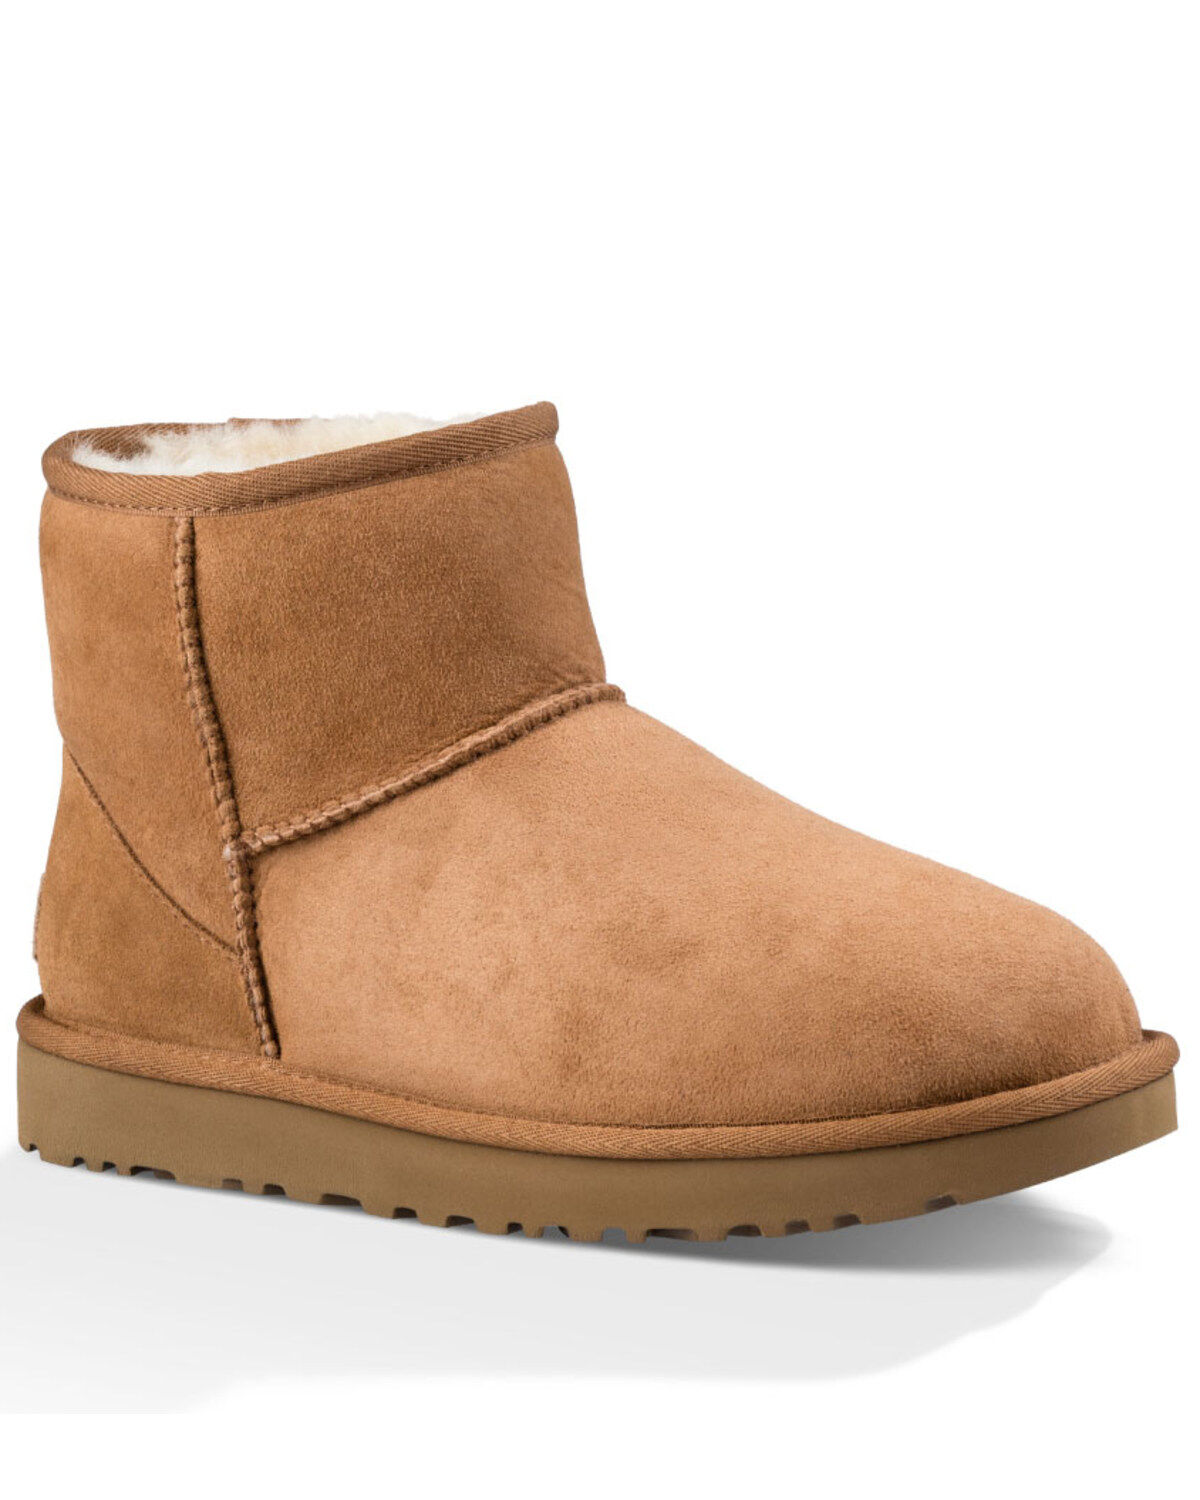 ugg boots for sale near me 